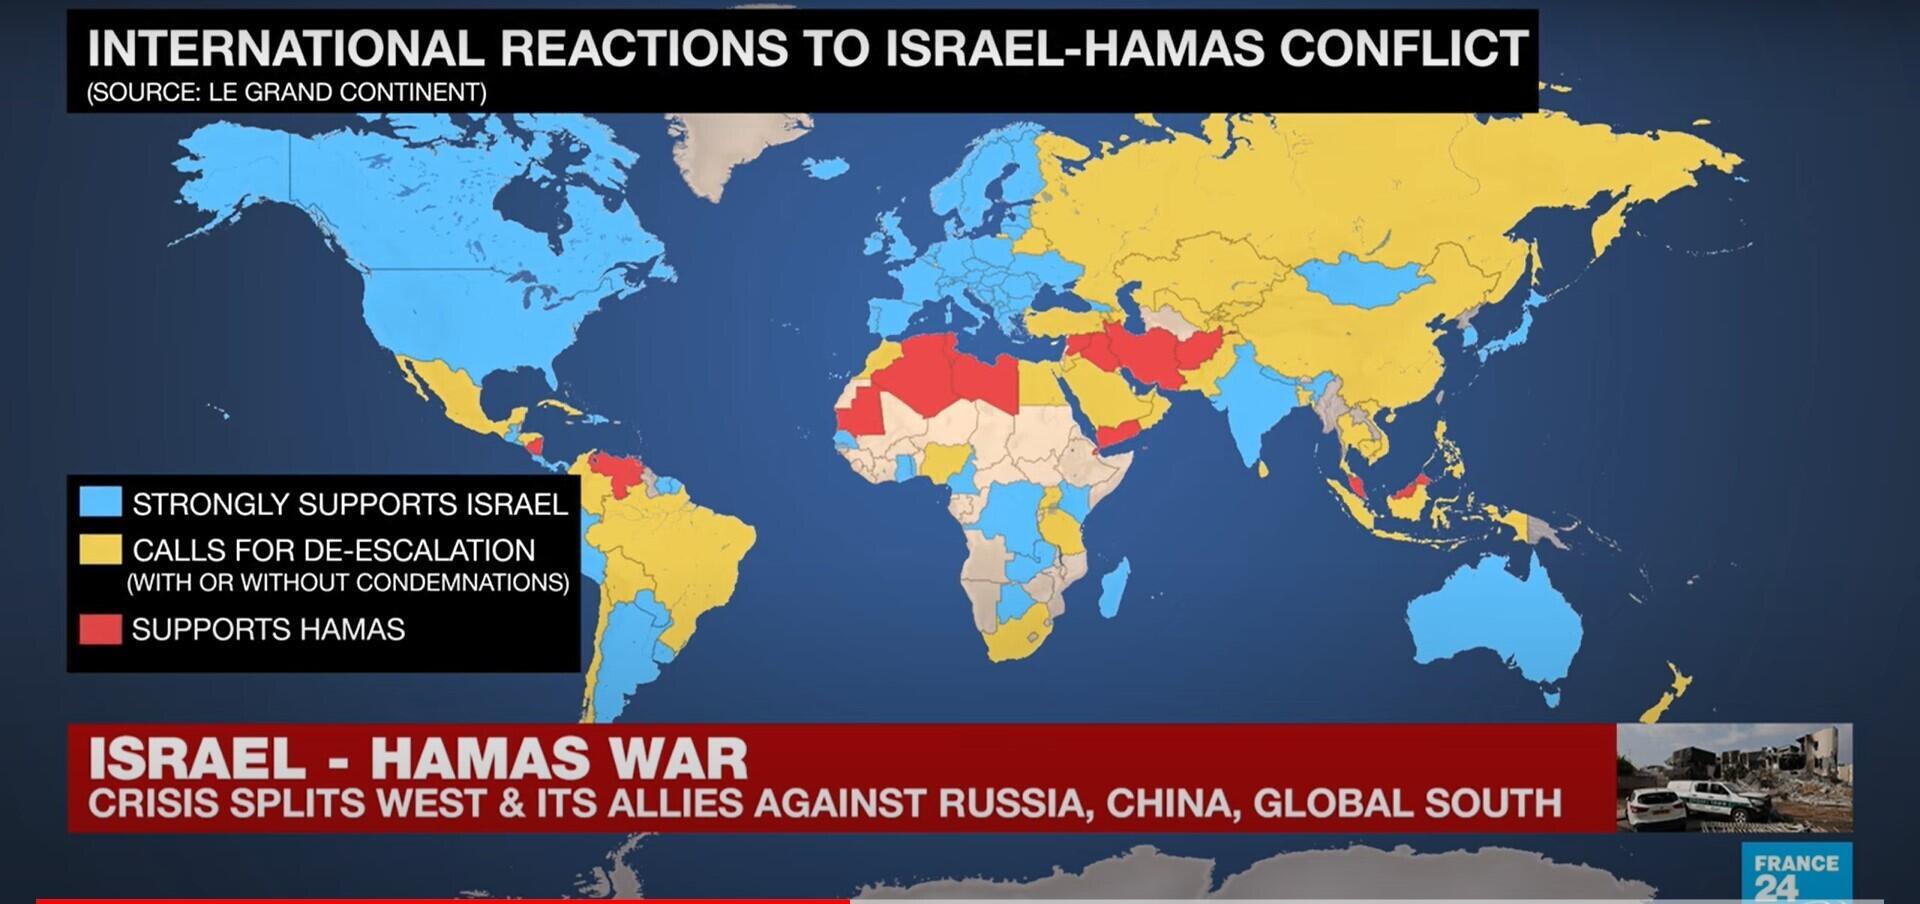 Reactions to the October 7 Hamas attack have split the international community.